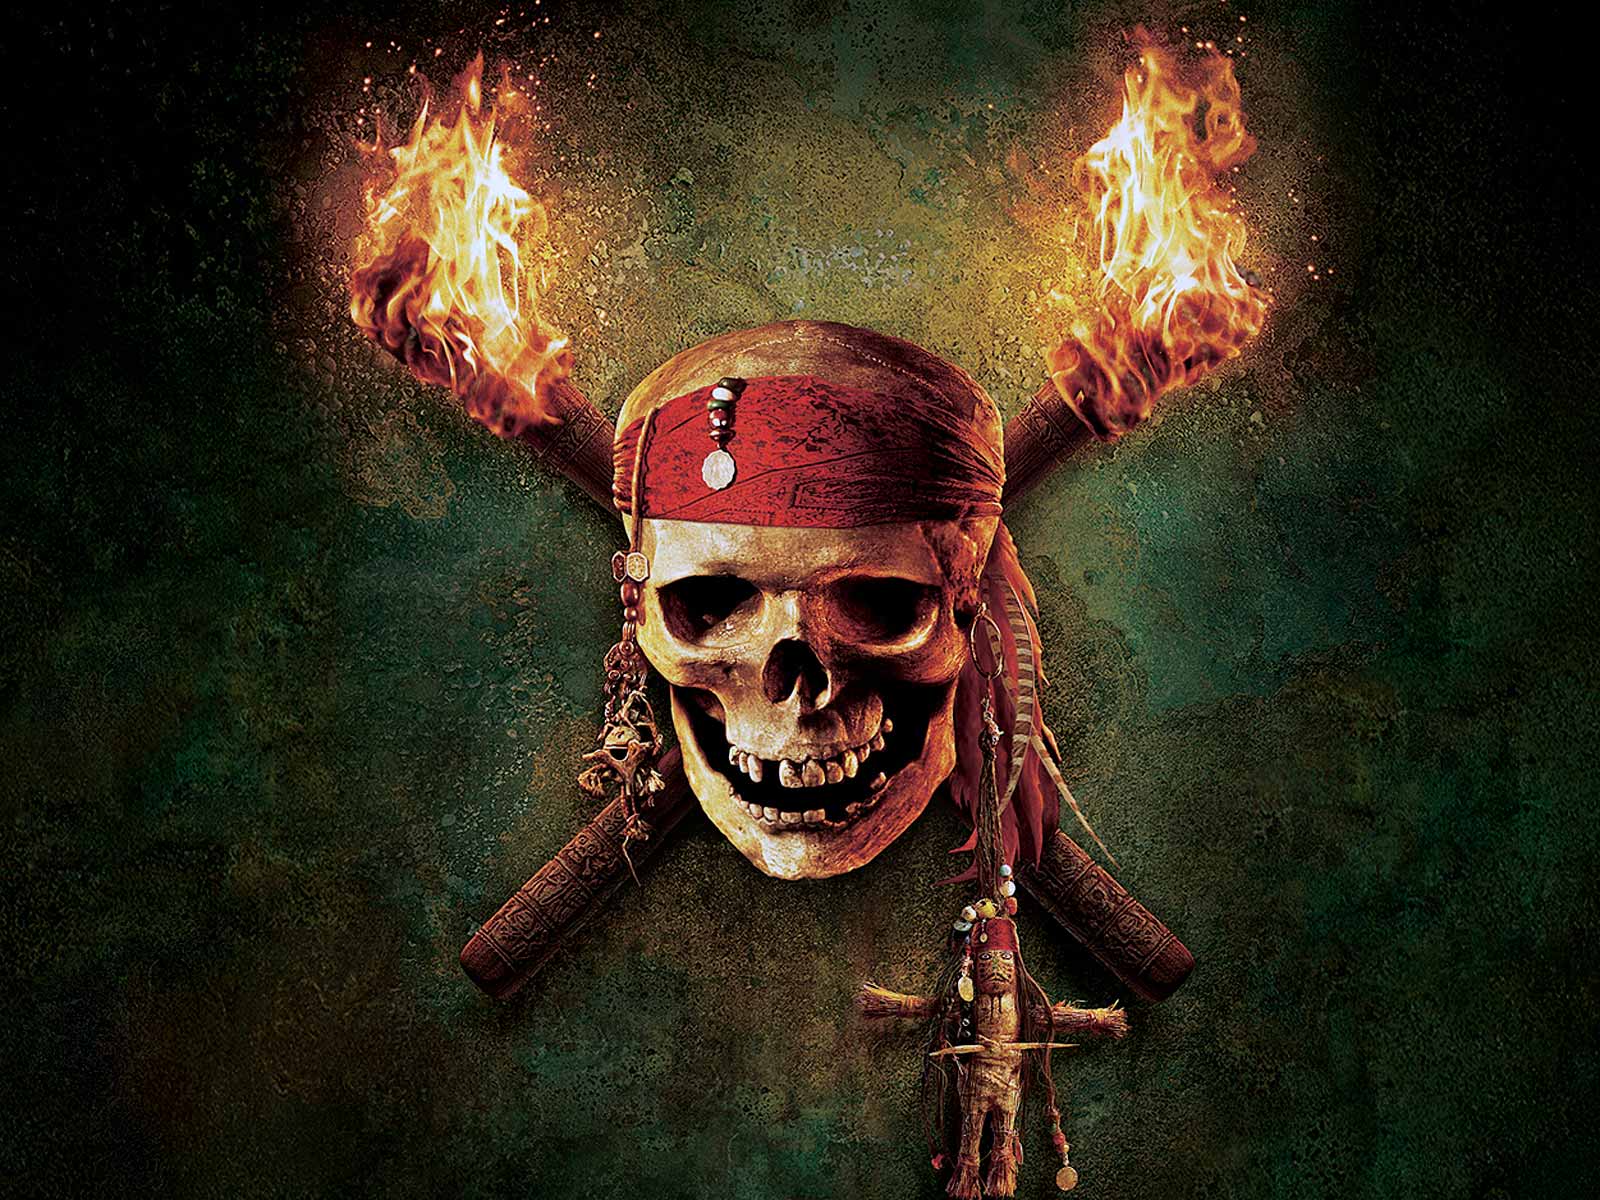 Pirates of the Caribbean Theme Song. Movie Theme Songs & TV